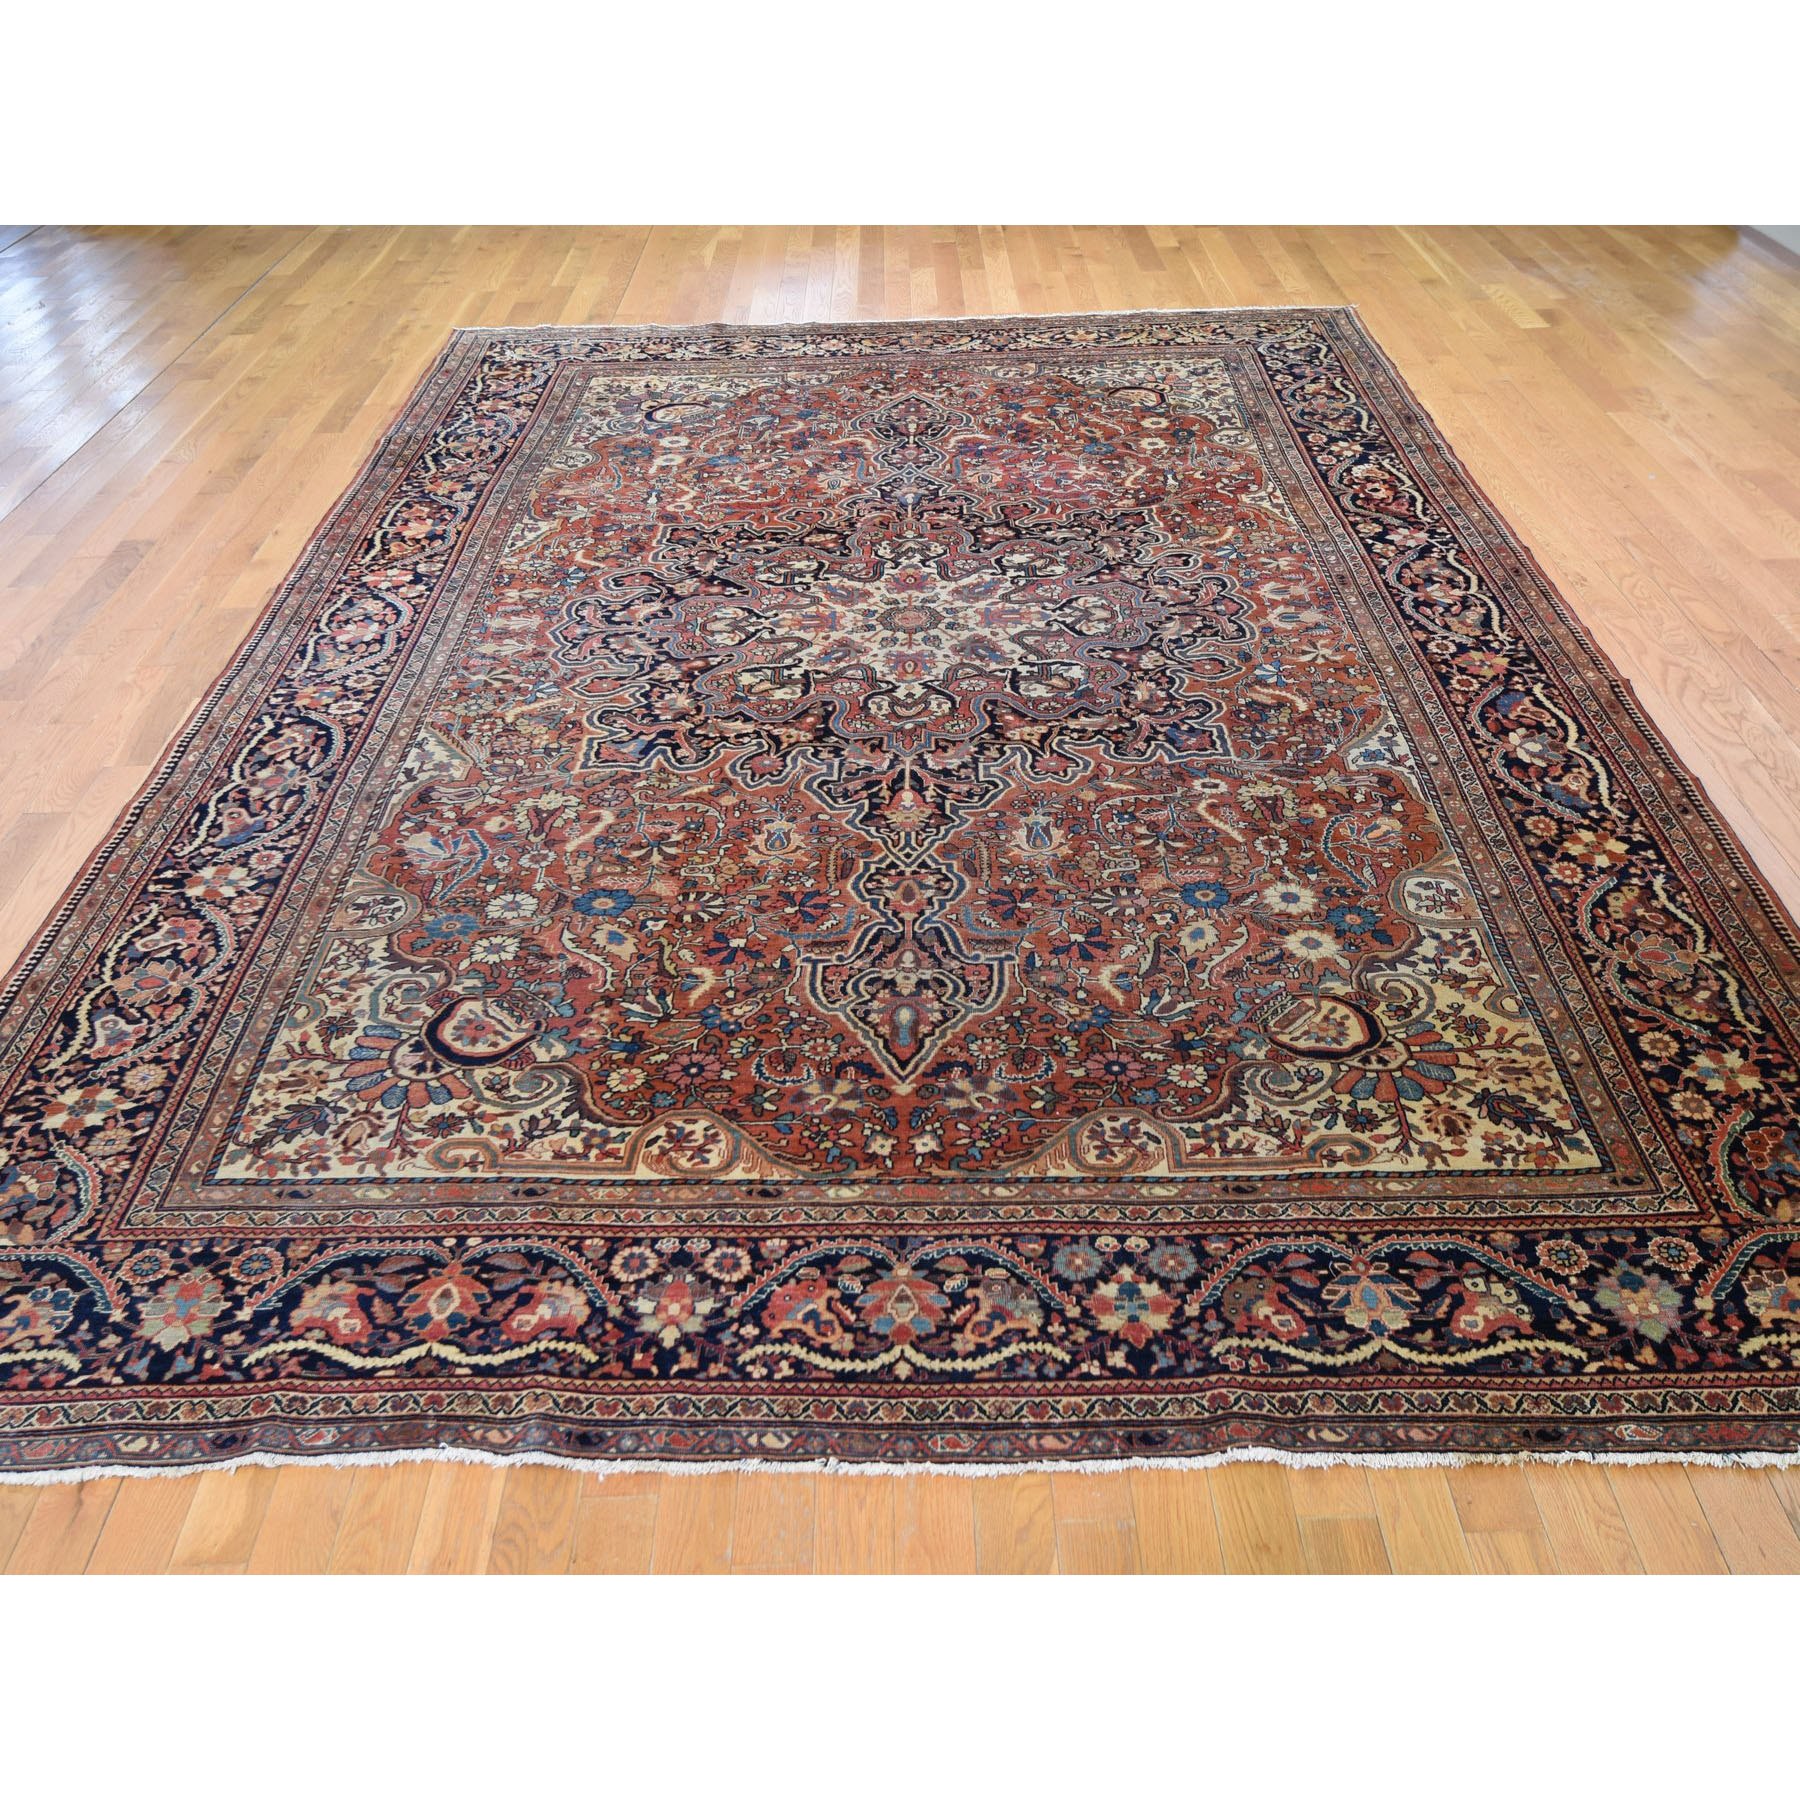 8-9 x12-6  Red Antique Persian Sarouk Fereghan  Evern Wear, Soft Hand Knotted Oriental Rug 